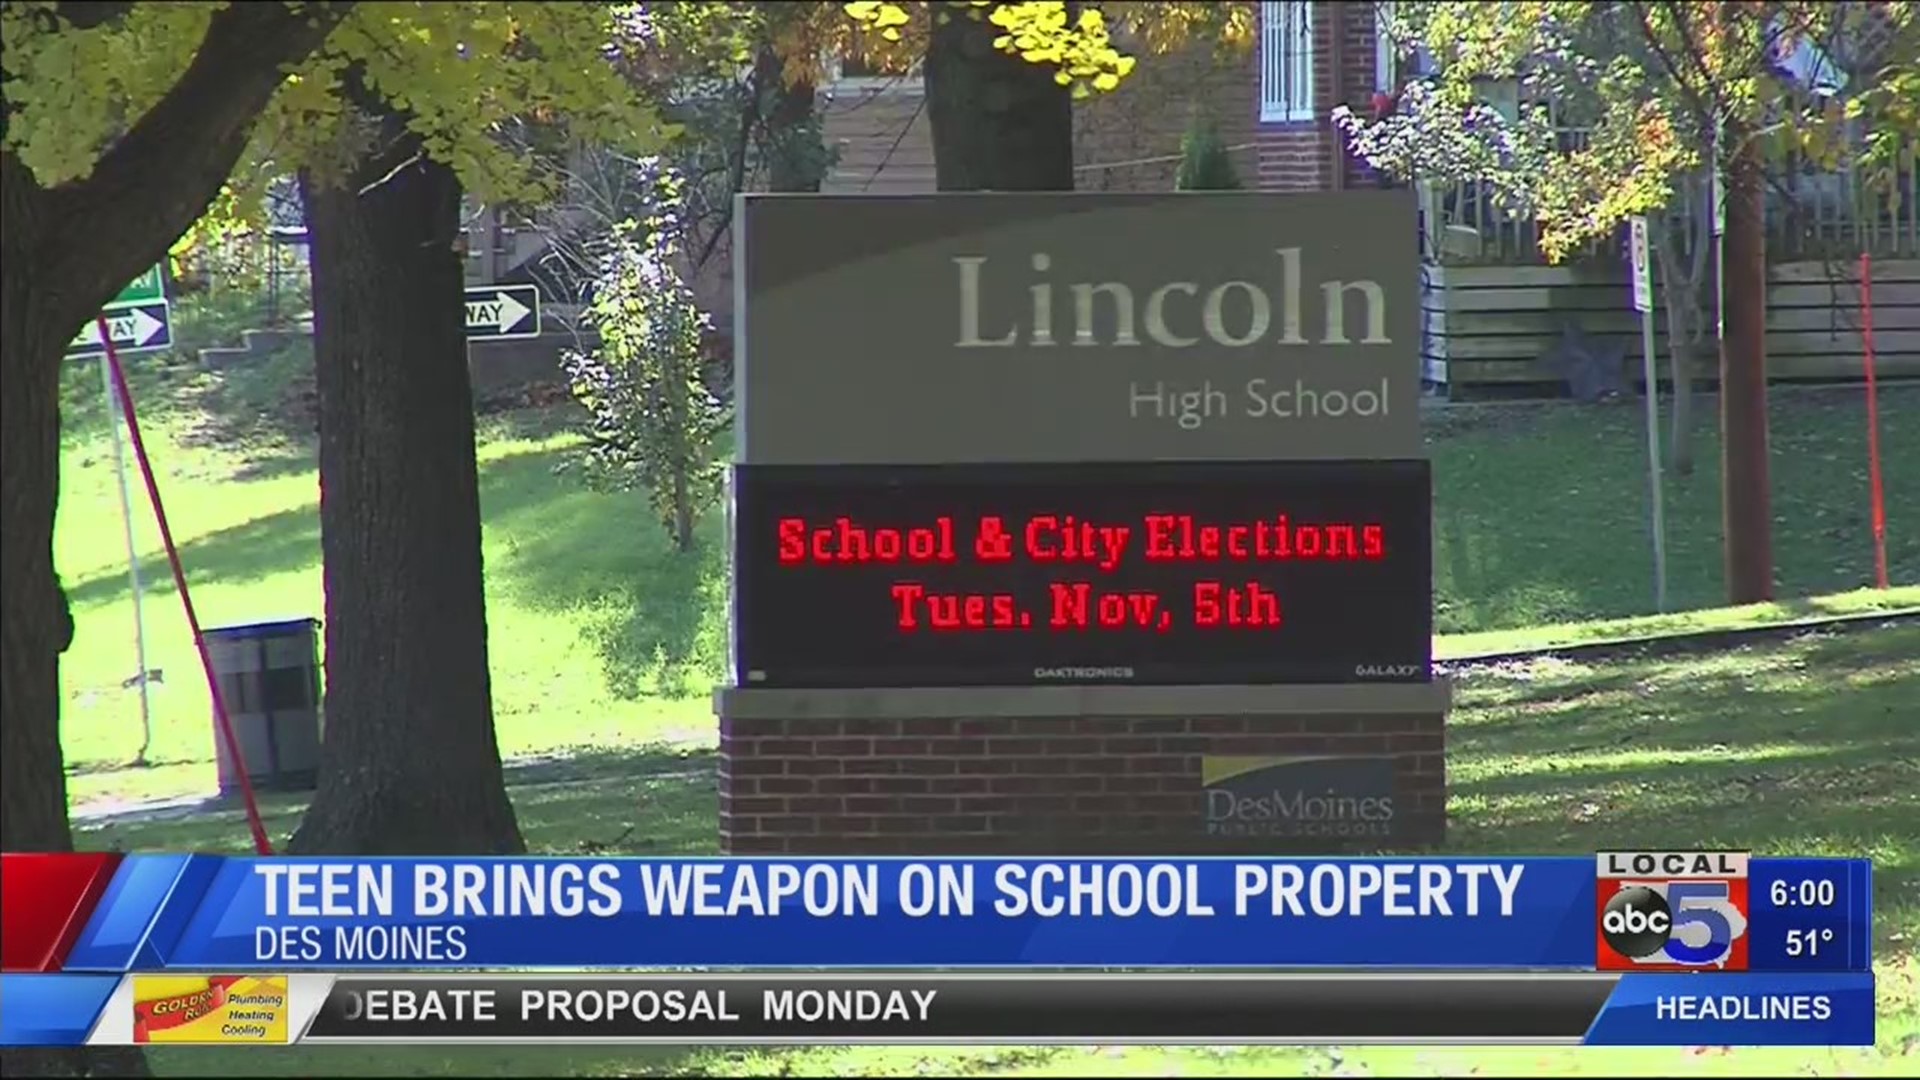 Police: Teenager arrested for bringing air pistol to school